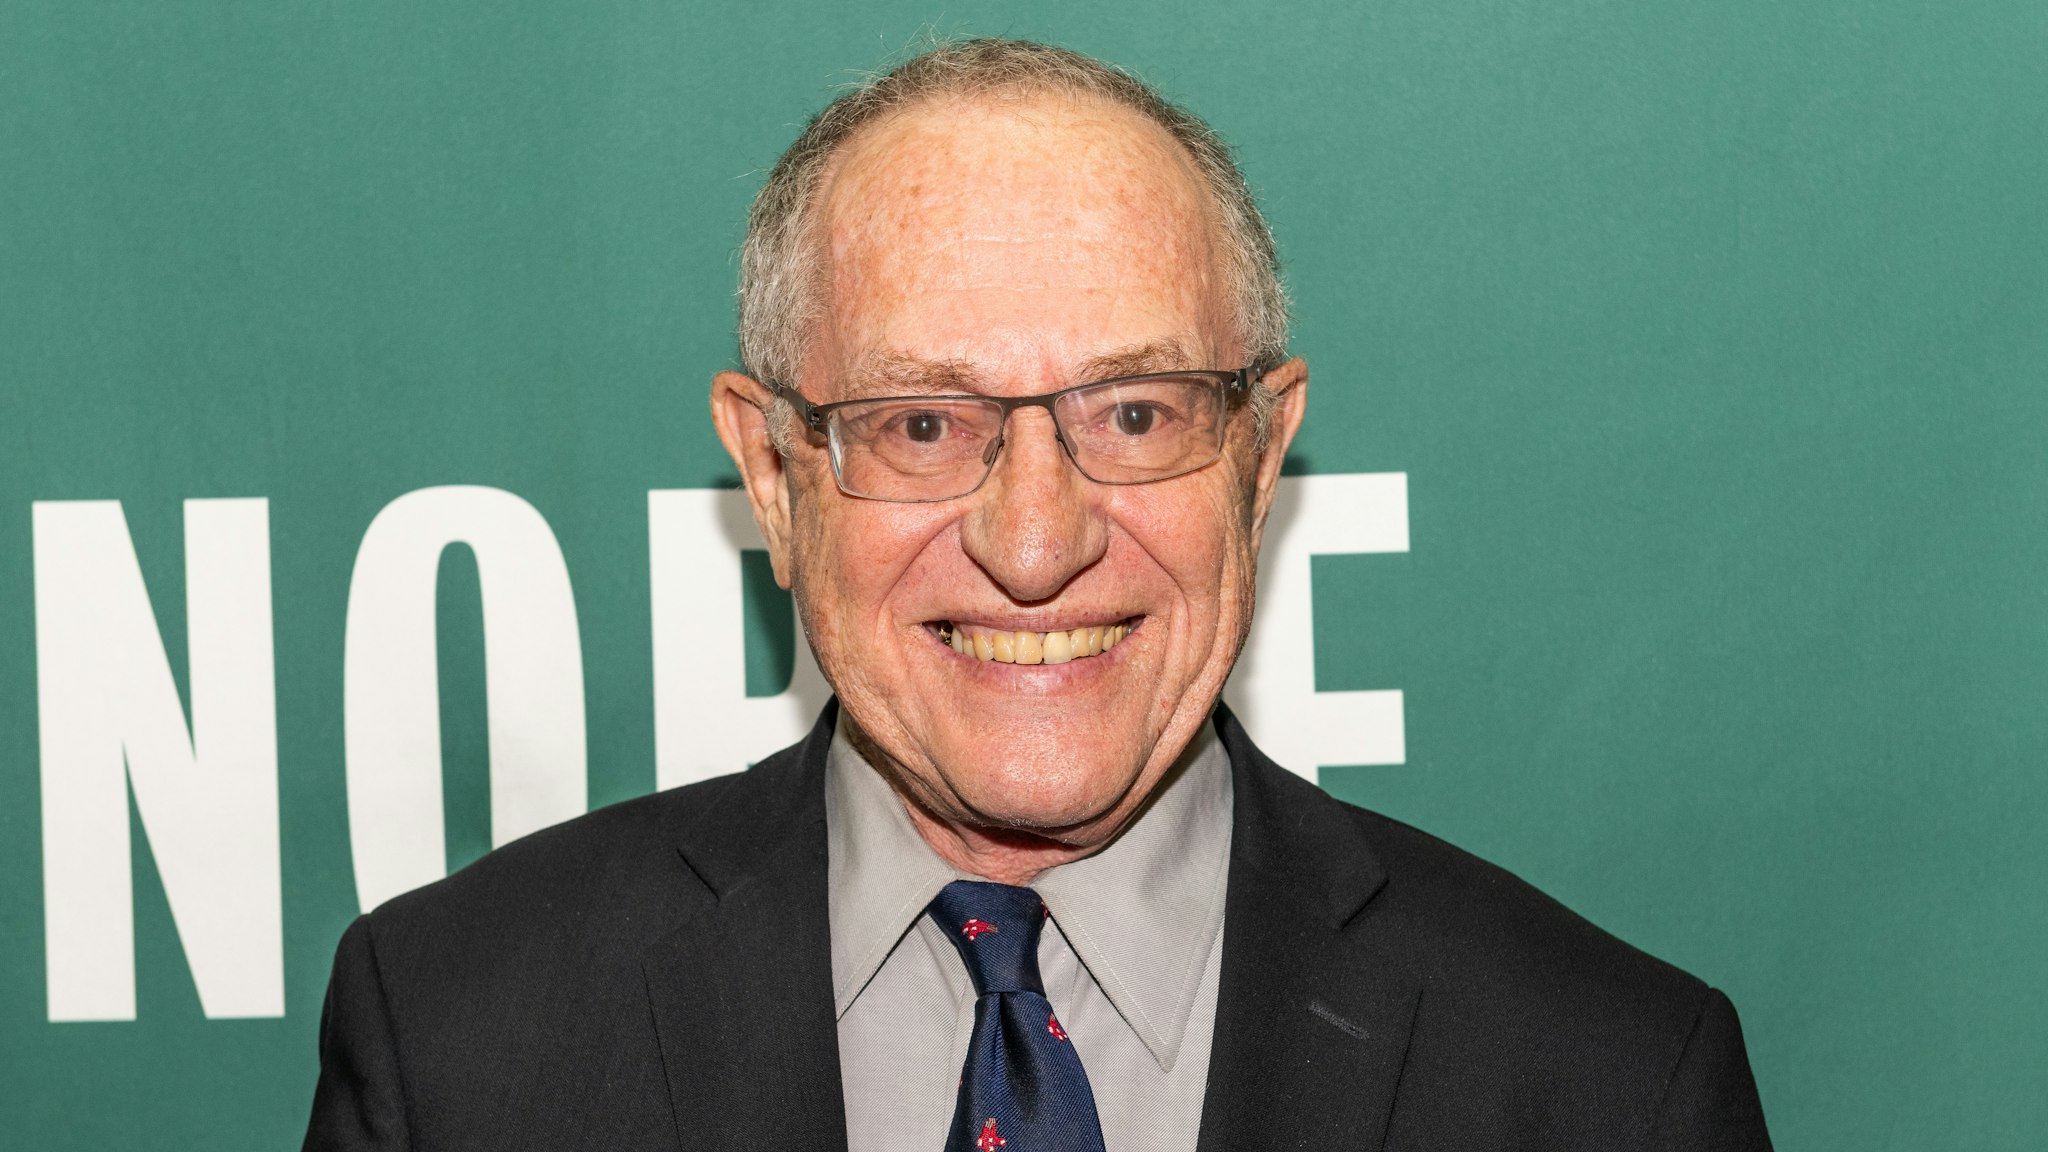 NEW YORK, NY, UNITED STATES - 2018/07/11: Alan Dershowitz promoting his newest book, "The Case Against Impeaching Trump", at the Barnes &amp; Noble in Union Square in New York City.